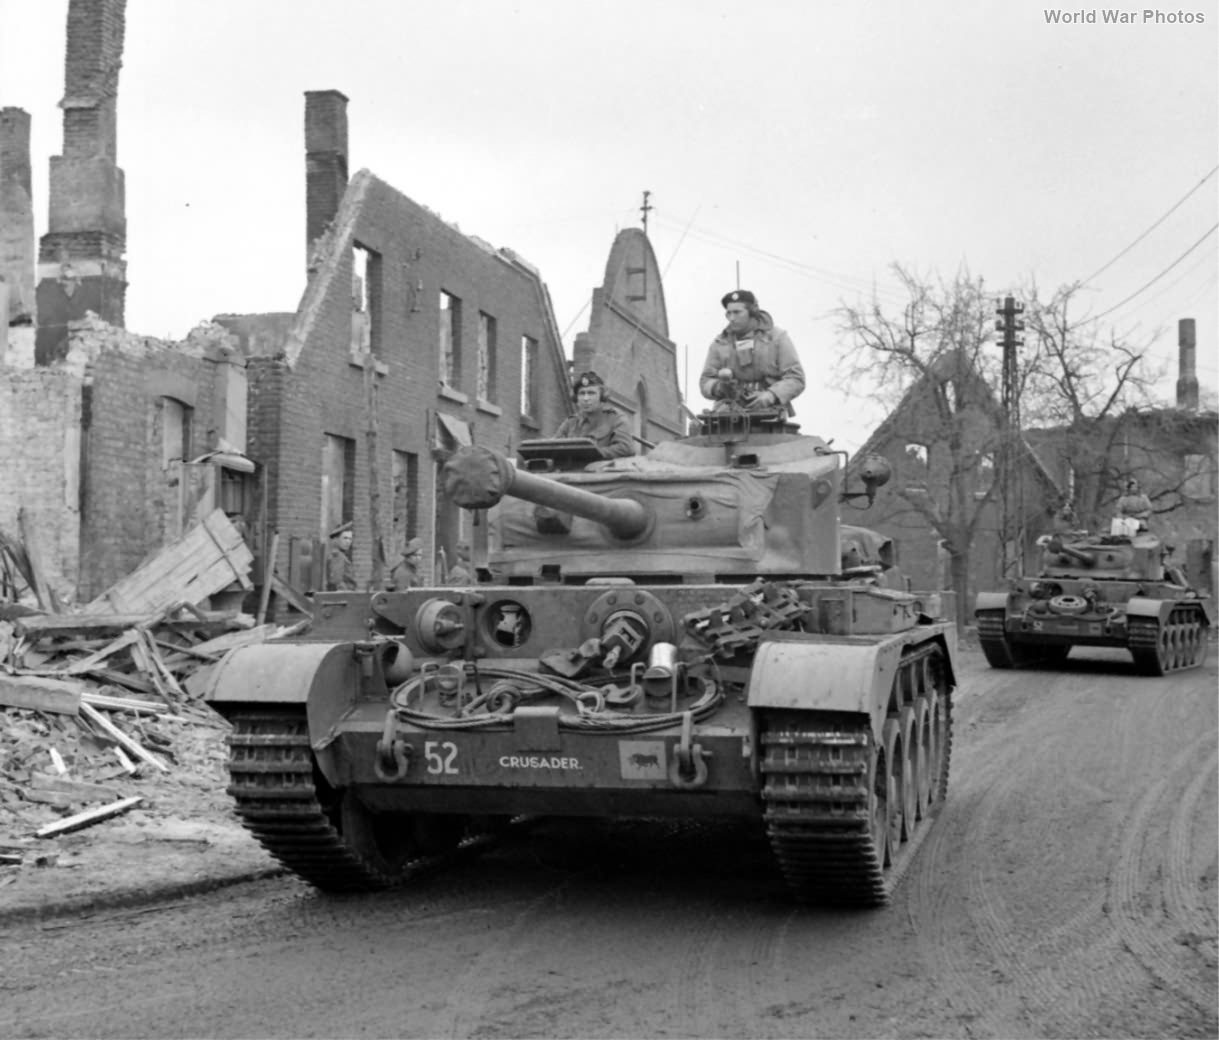 Comets of 11th Armoured Division 30 March 1945